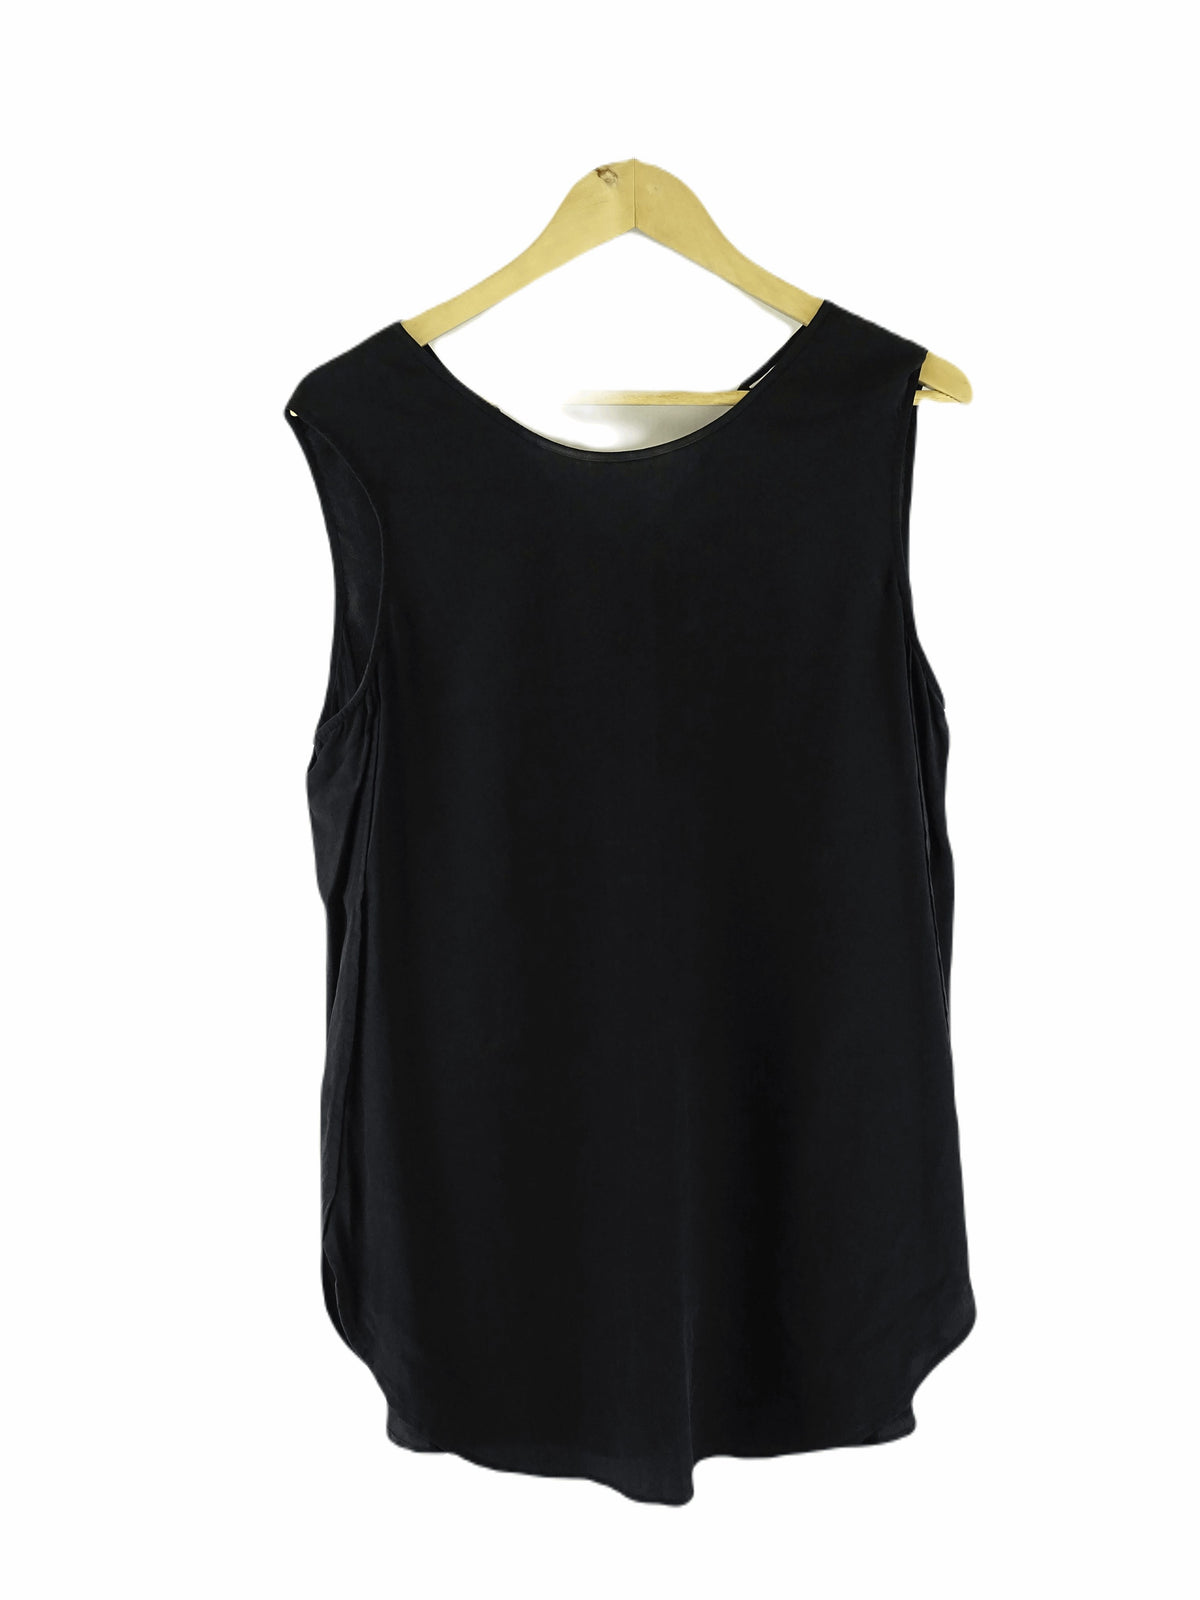 Country Road Black Sleeveless Cami Top L